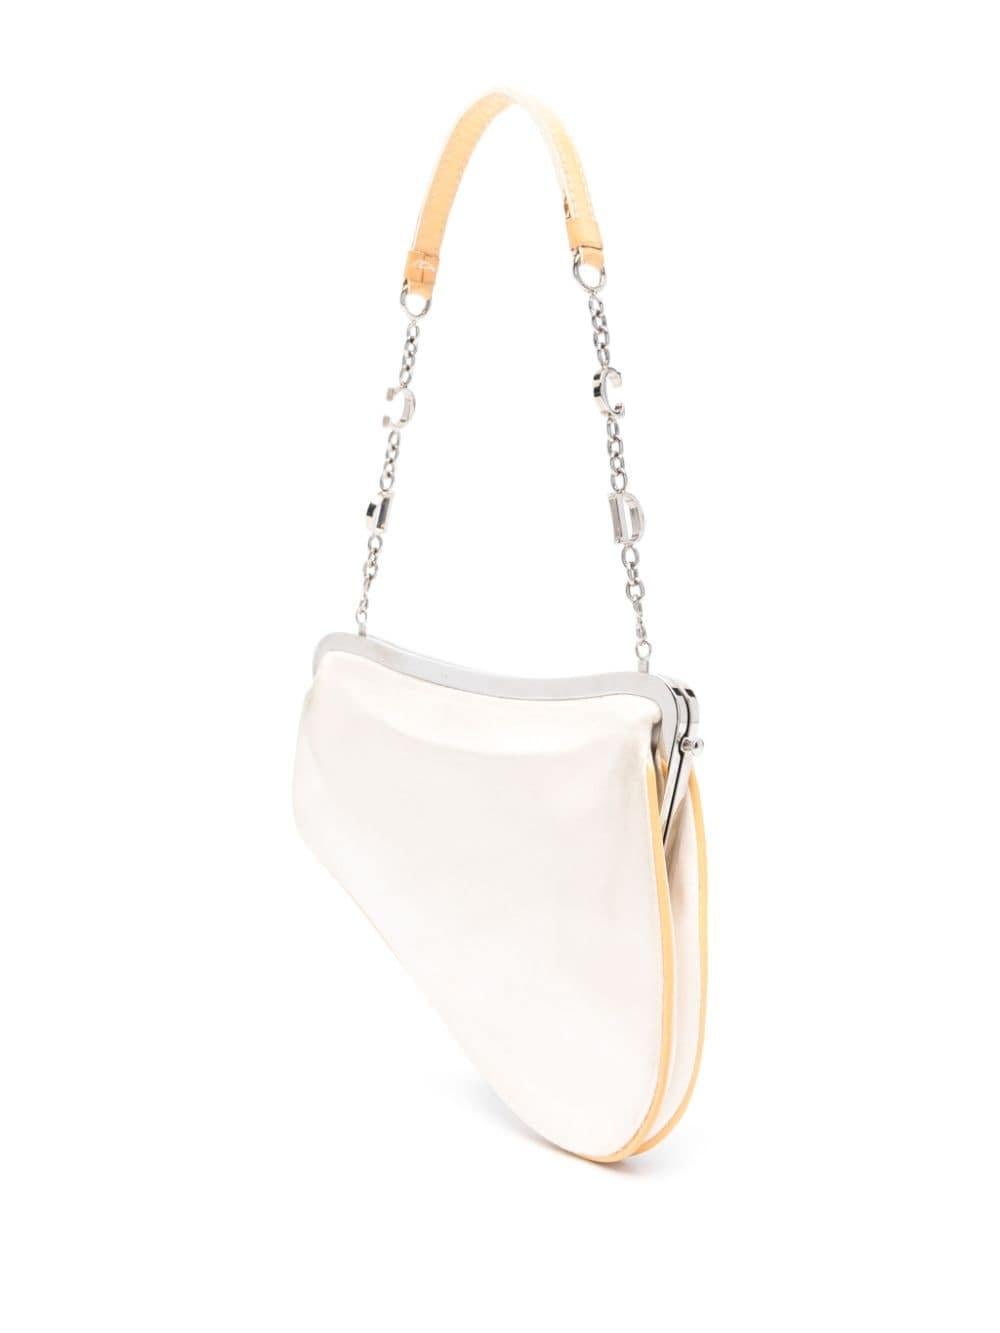 Christian Dior by J Galliano Ivory Silk Mini Saddle Bag In Good Condition For Sale In Paris, FR